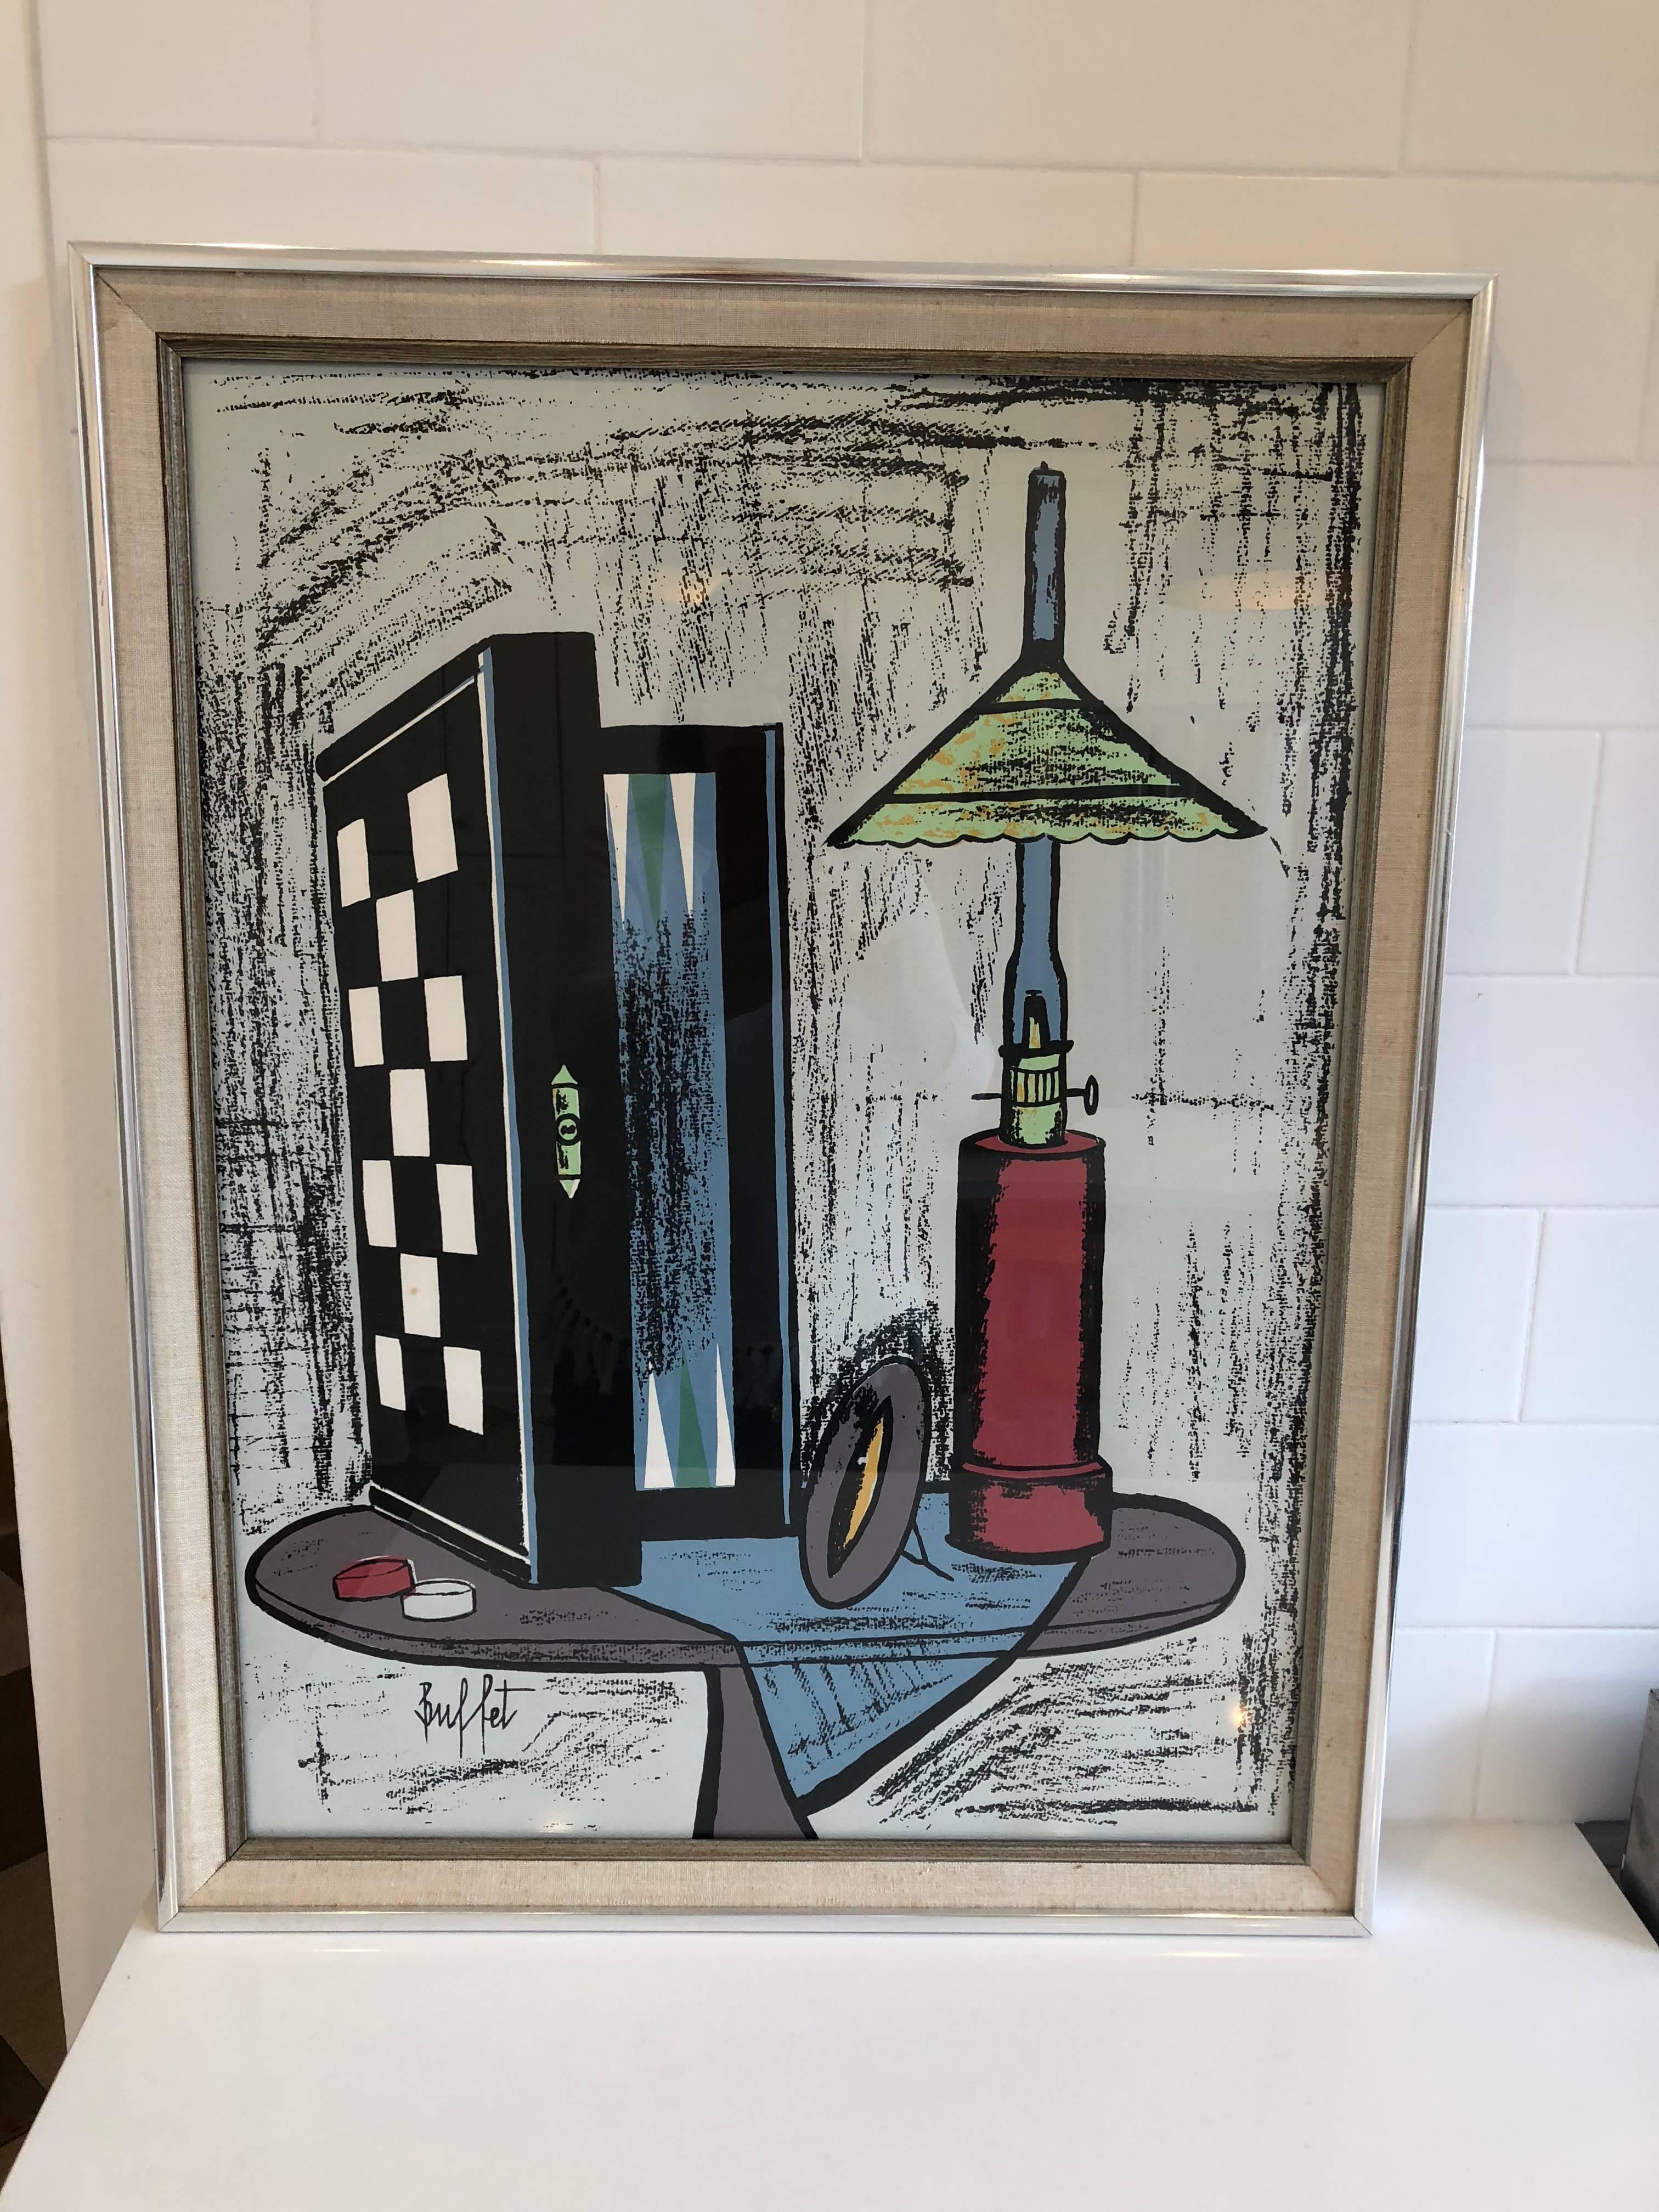 Framed Lithograph by Bernard Buffet In Excellent Condition For Sale In Geneva, IL